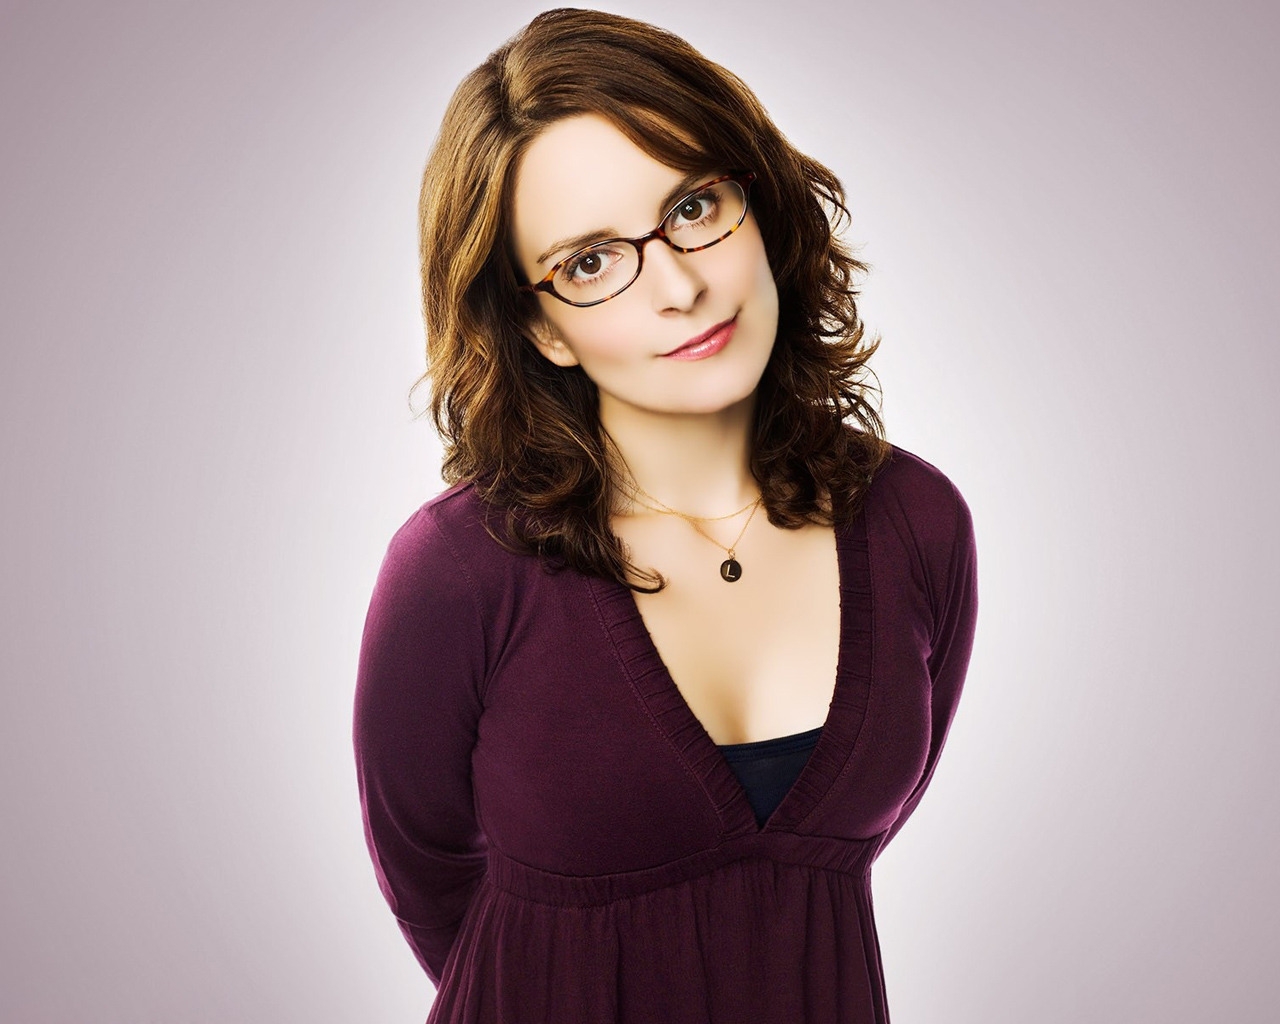 Tina Fey for 1280 x 1024 resolution